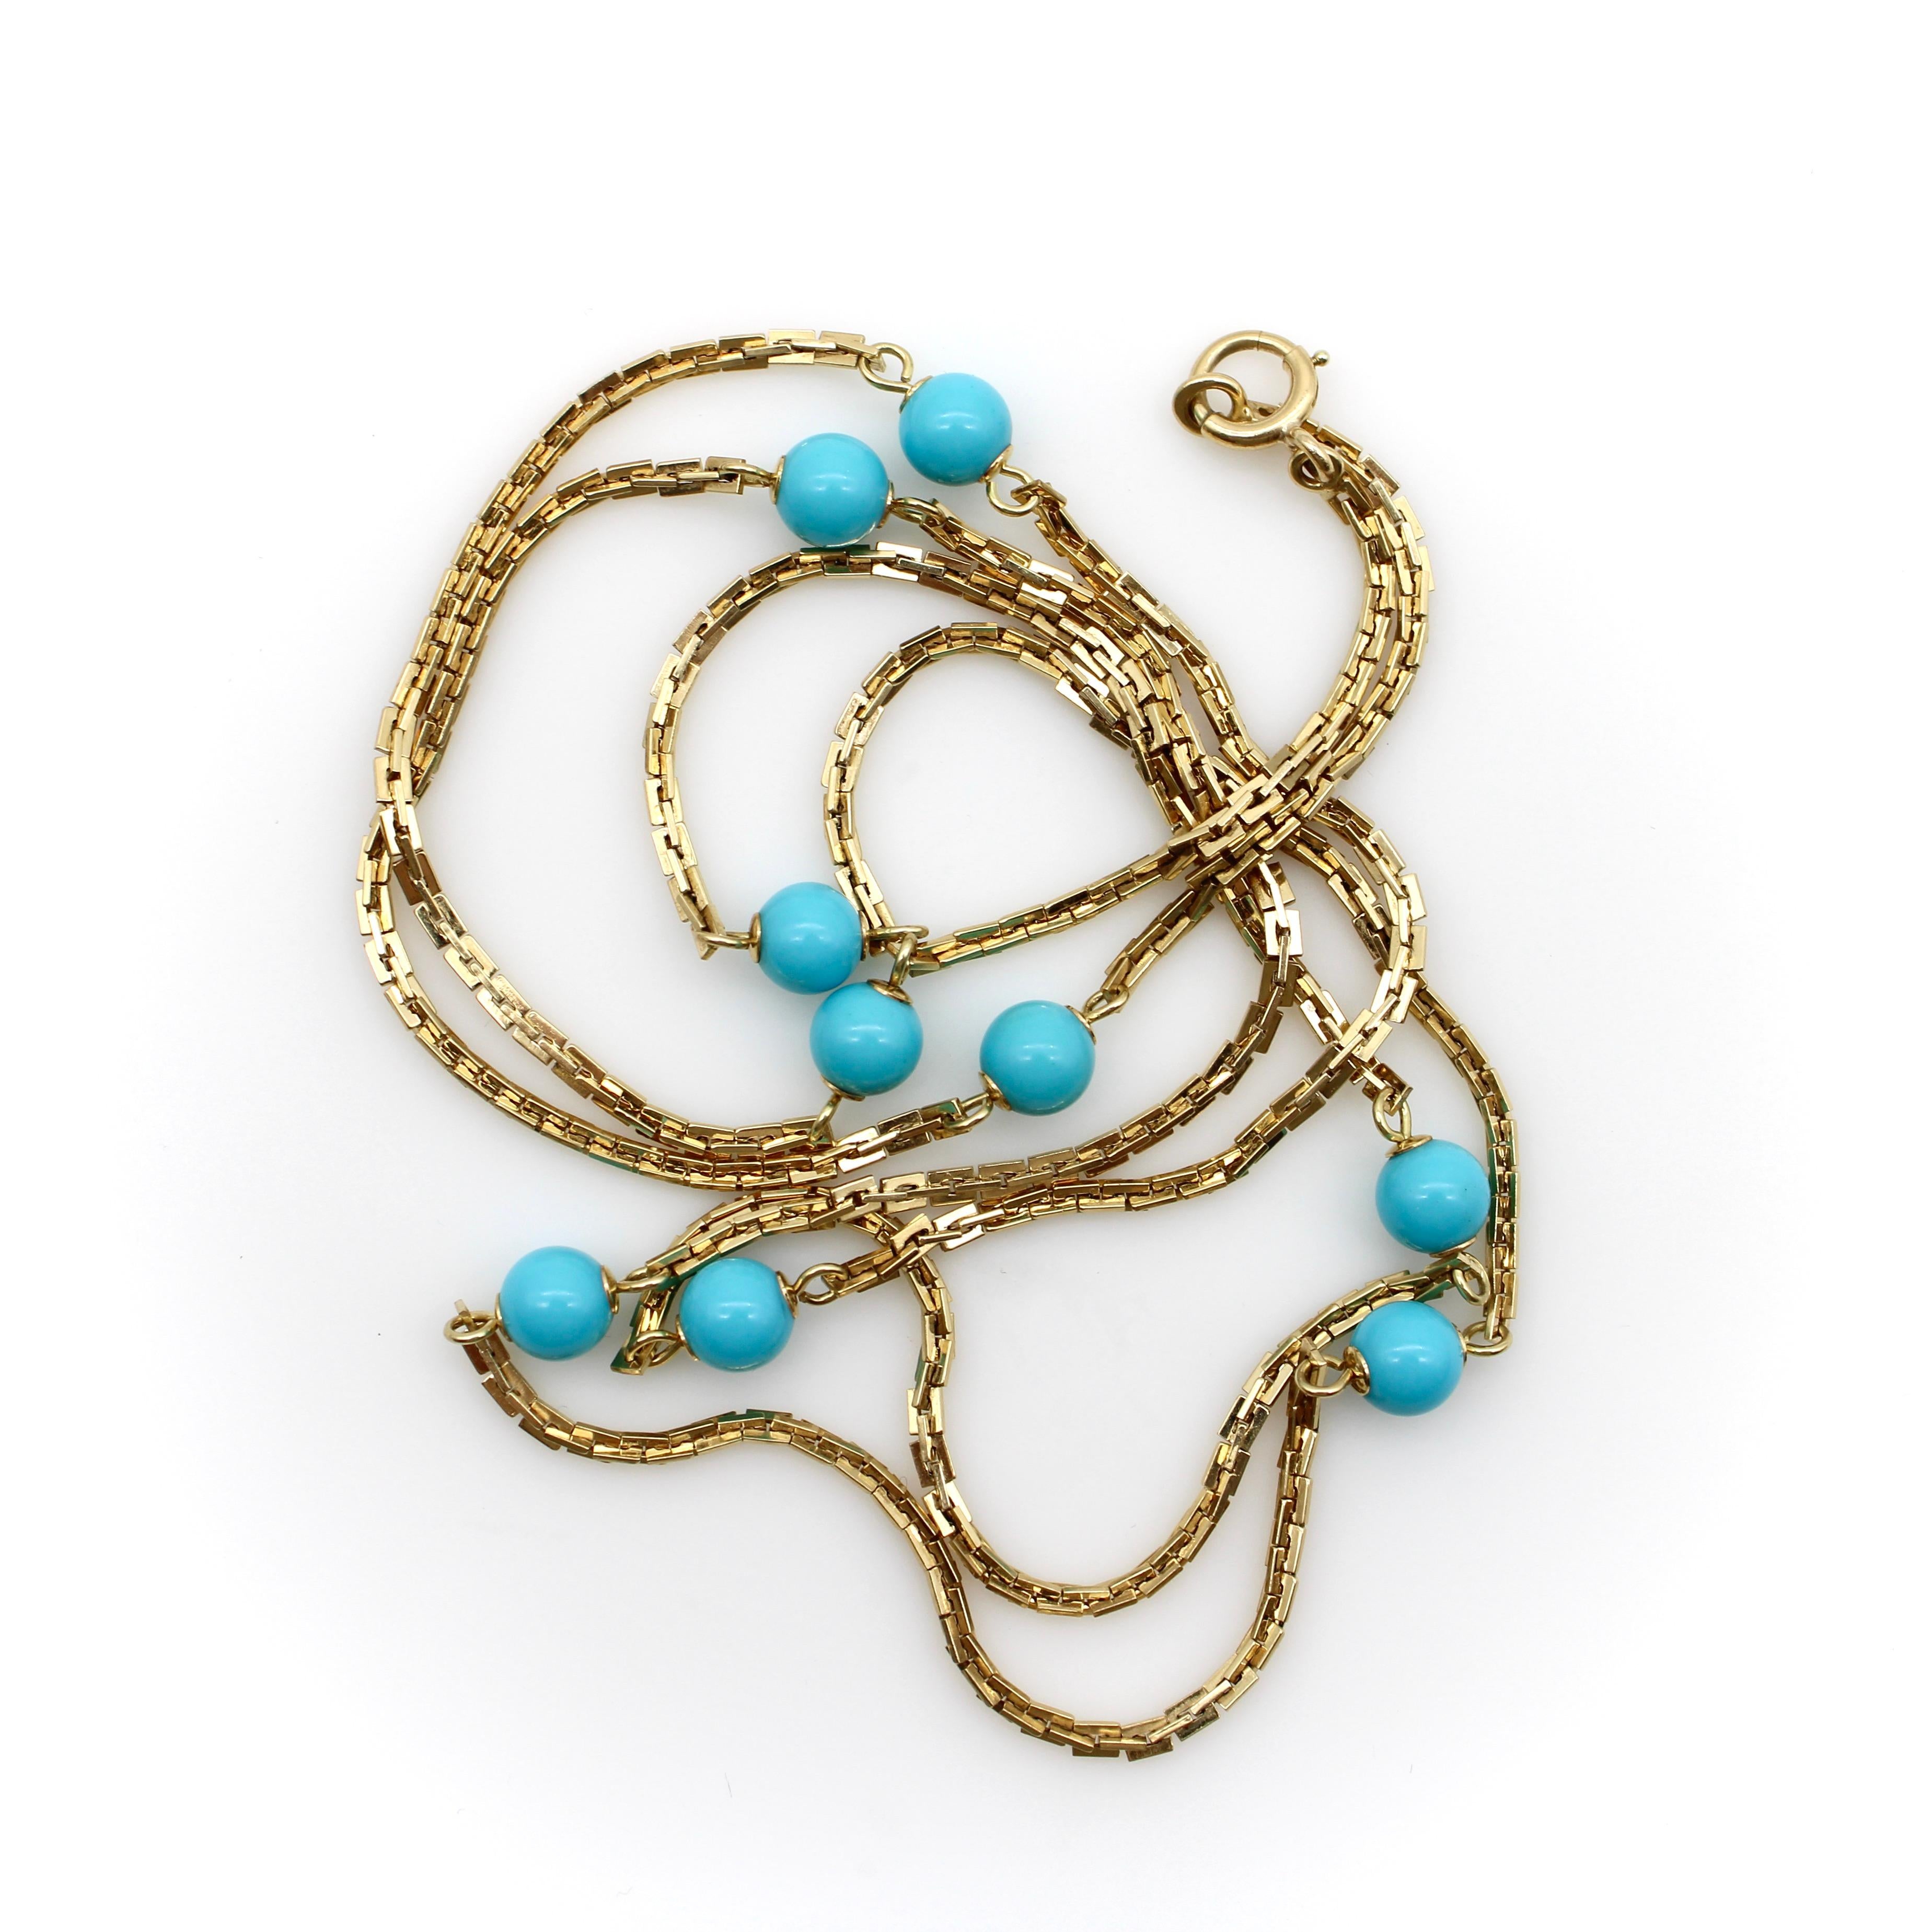 This extra long 14k gold necklace has stations of nine round turquoise beads. The chain consists of a rectangular link that bisects itself to create a rhythmic pattern. The link has lots of dimensionality to it that adds a shimmer as the light